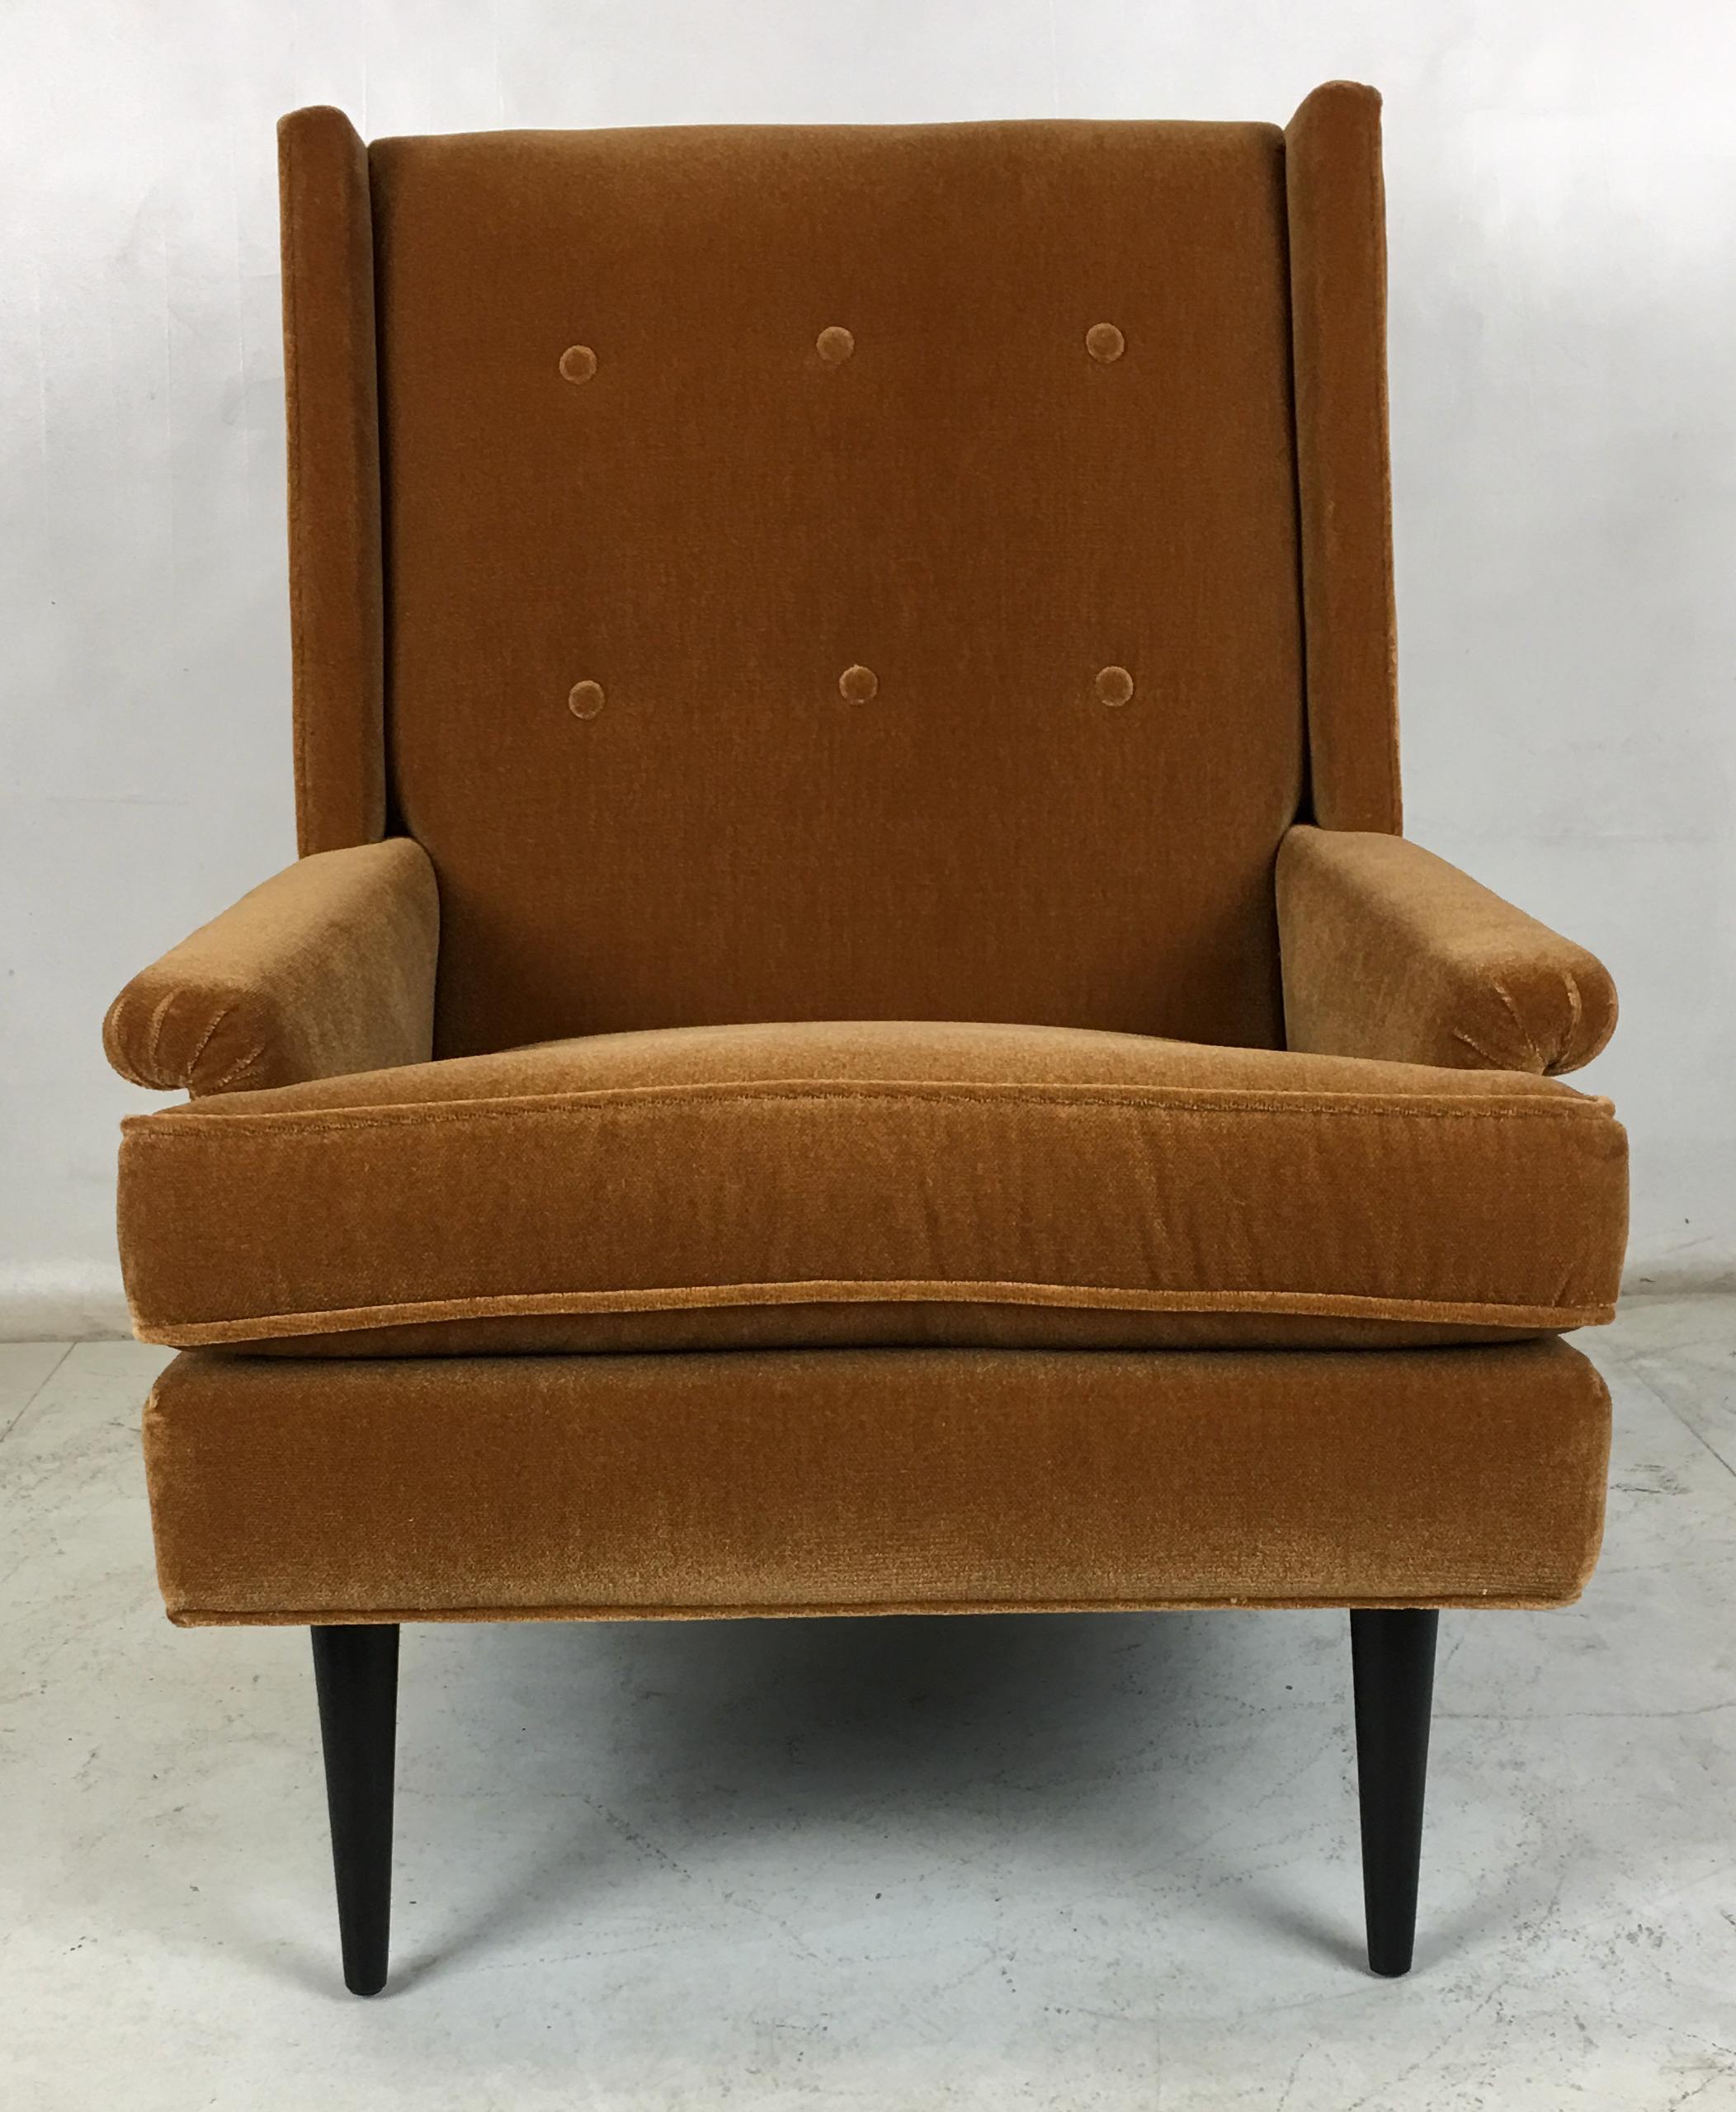 Pair of Italian Modern style lounge chairs by Karpen of California. The pair have been painstakingly restored from the ground up; reupholstered in luxurious, heavyweight burnt gold velvet with refinished legs. The chairs are extremely comfortable as